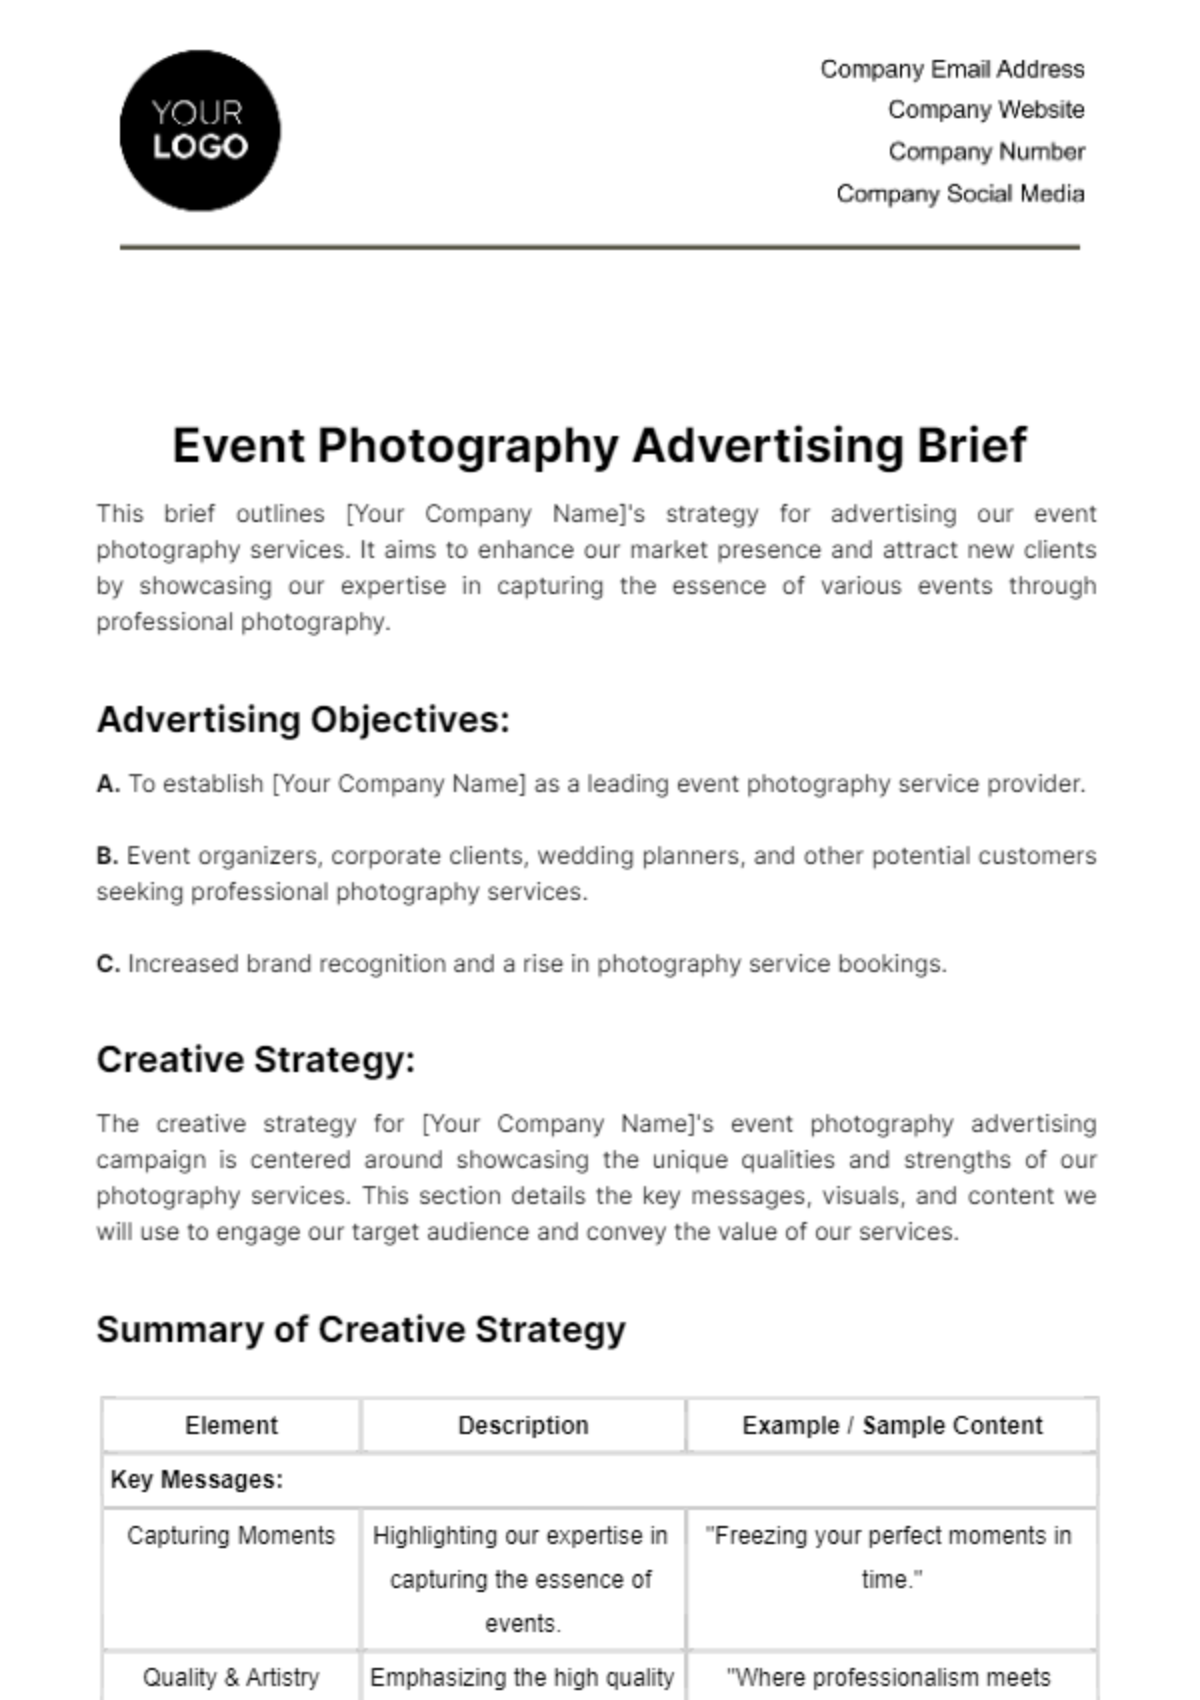 Event Photography Advertising Brief Template